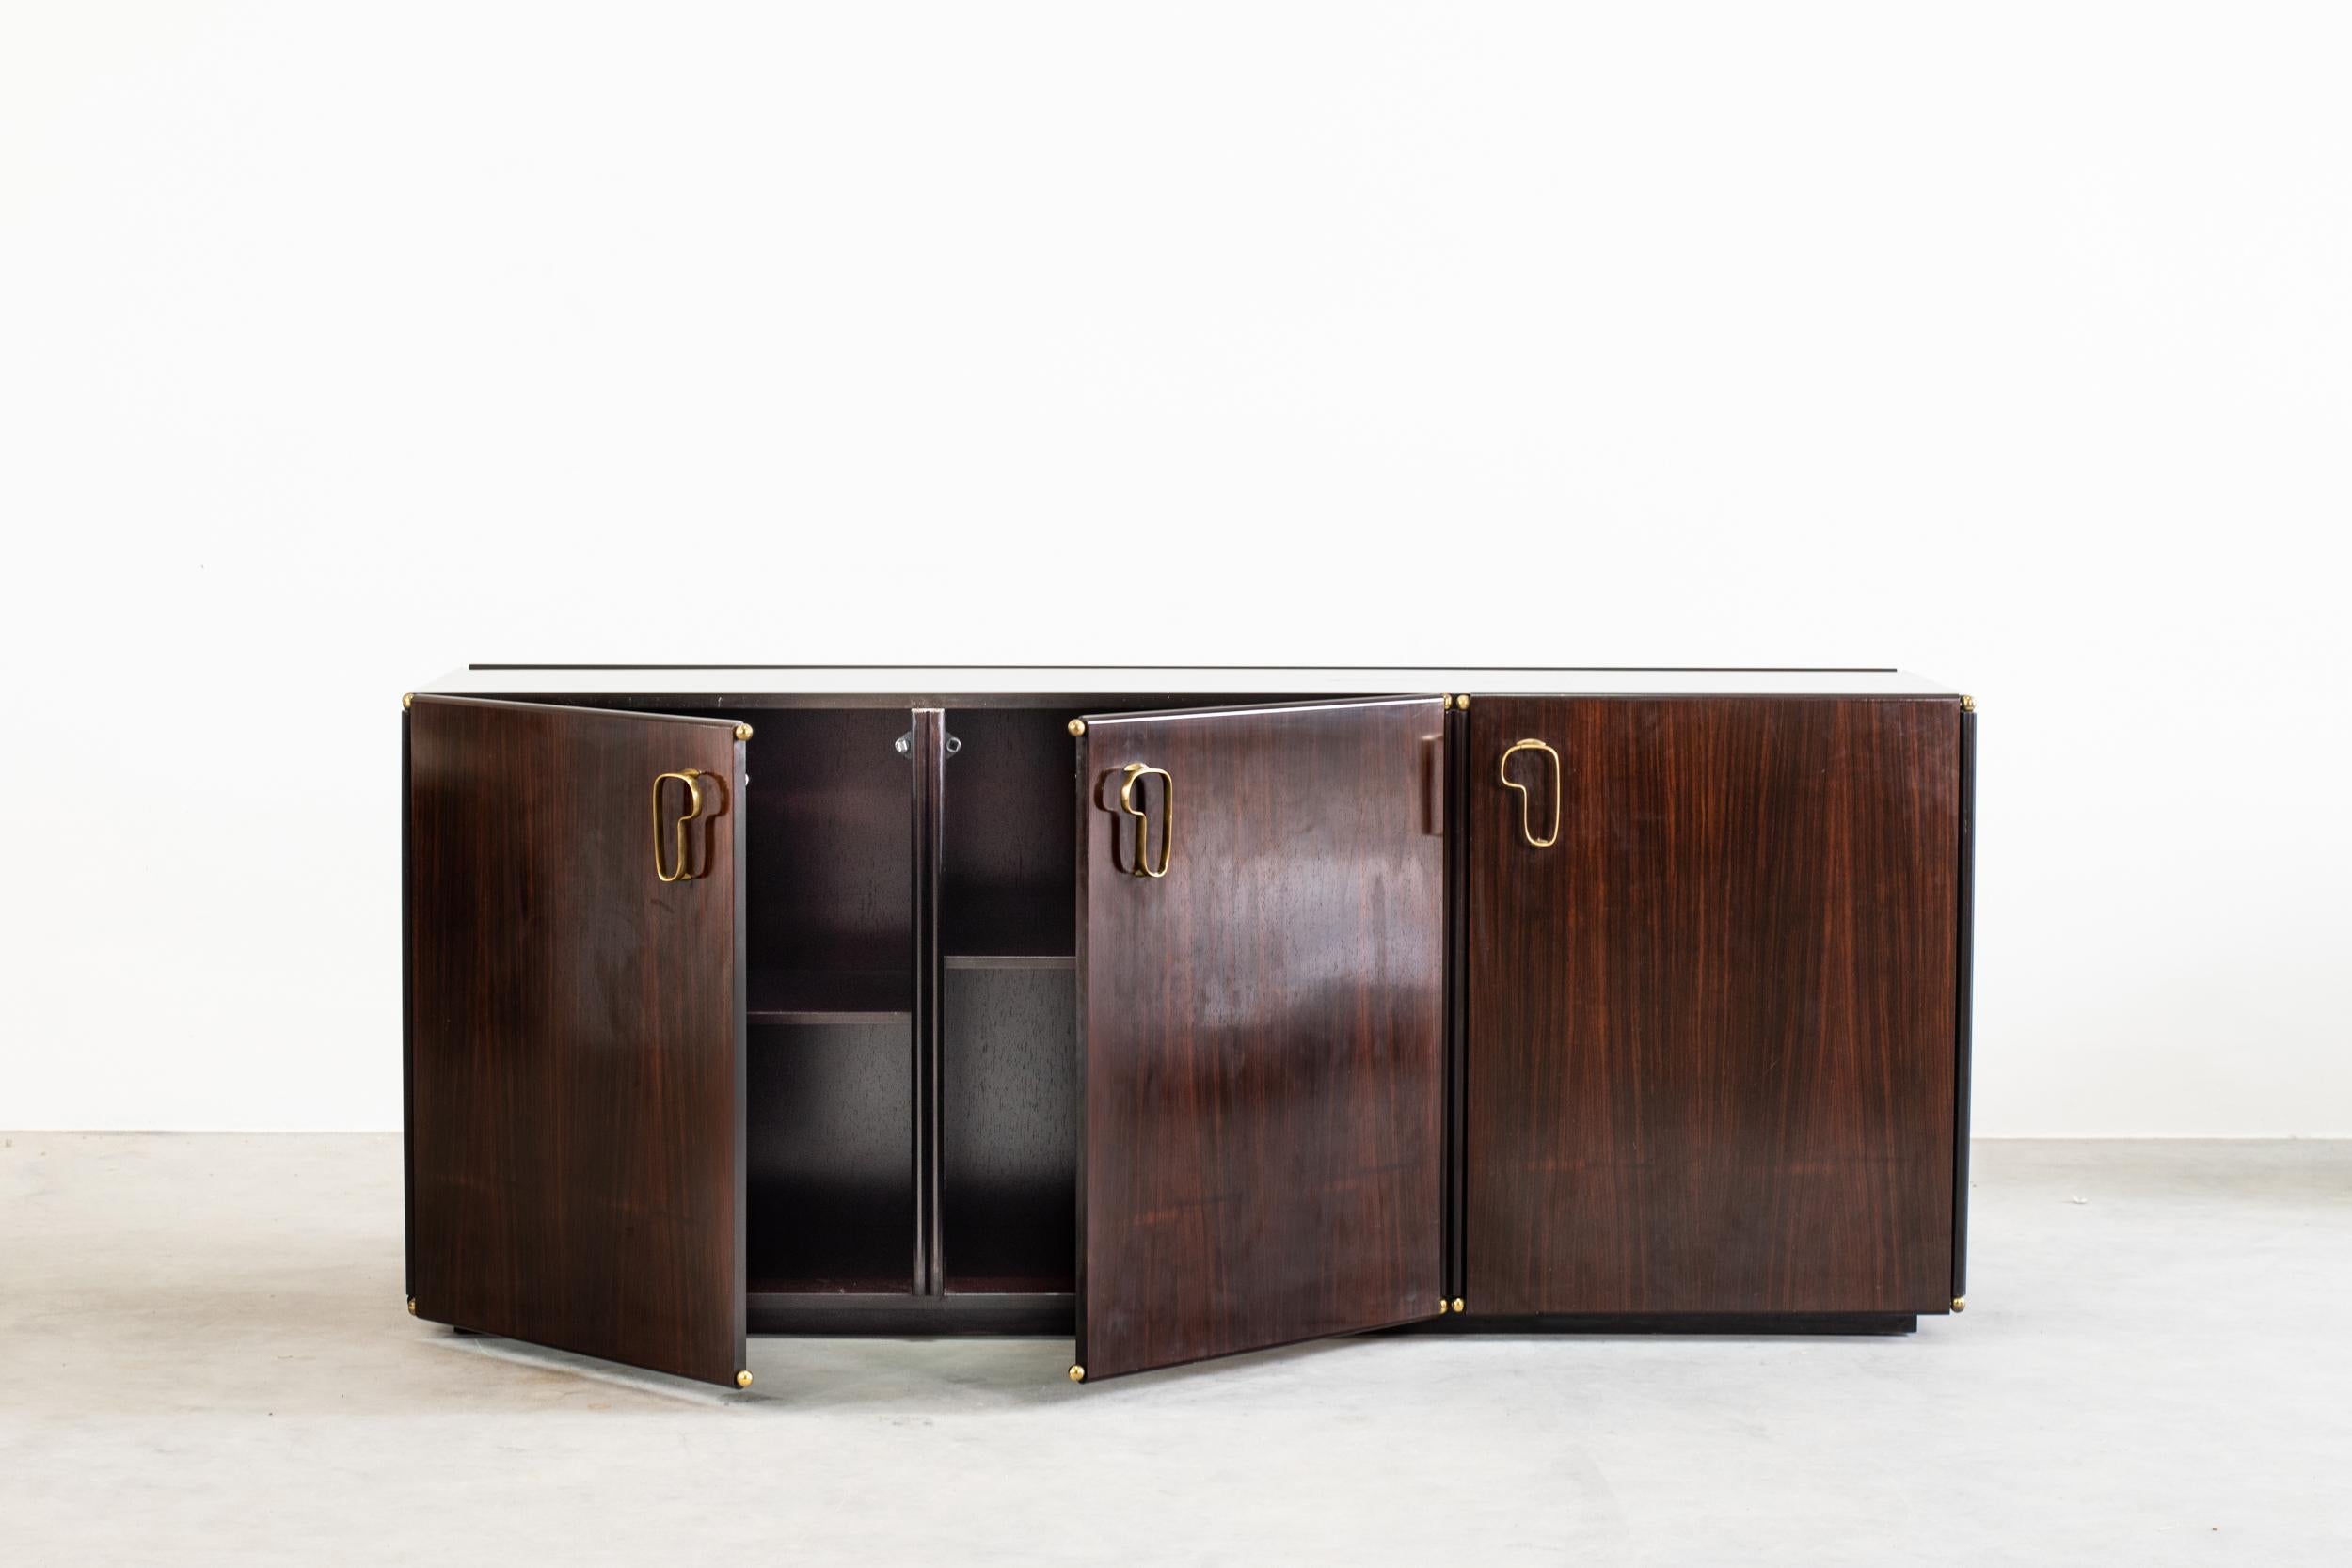 Rosewood Sideboard with Handcrafted Handles
Italian Manufacture, 1950s
Width 180 x Depth 50 x Height 75 cm.